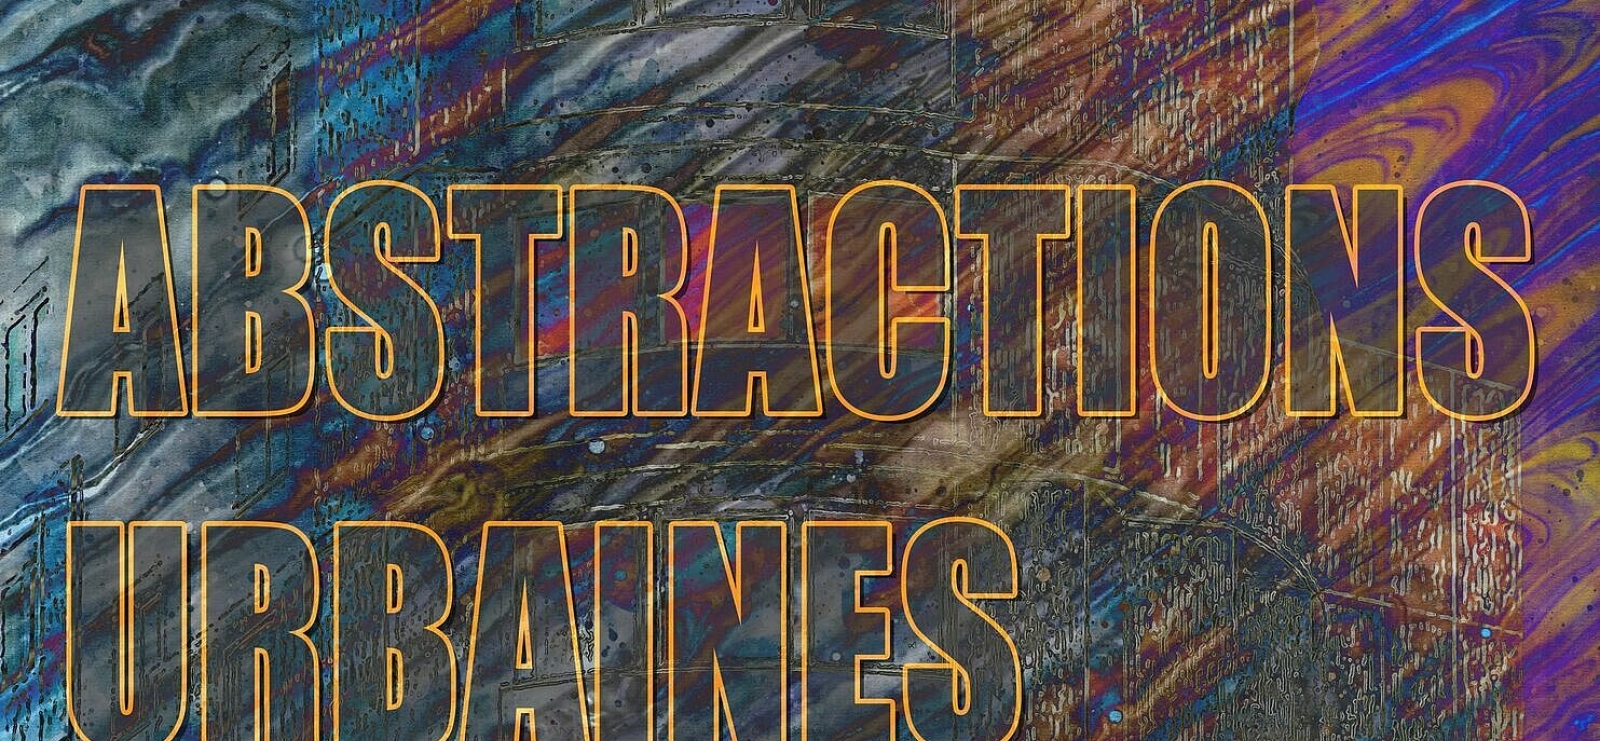 Abstractions Urbaines